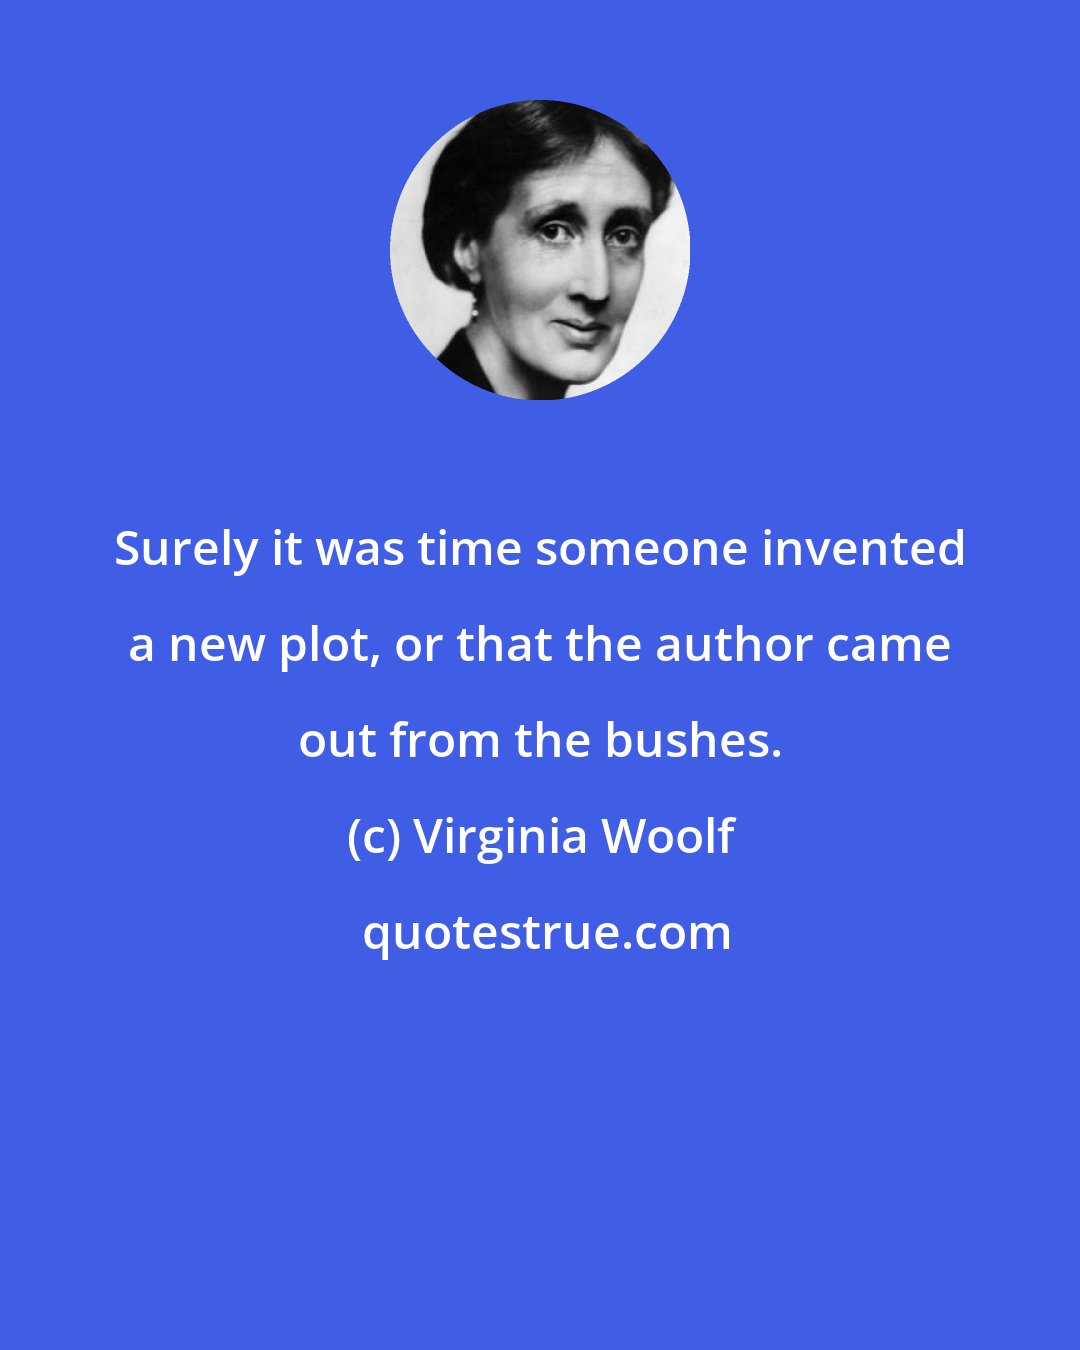 Virginia Woolf: Surely it was time someone invented a new plot, or that the author came out from the bushes.